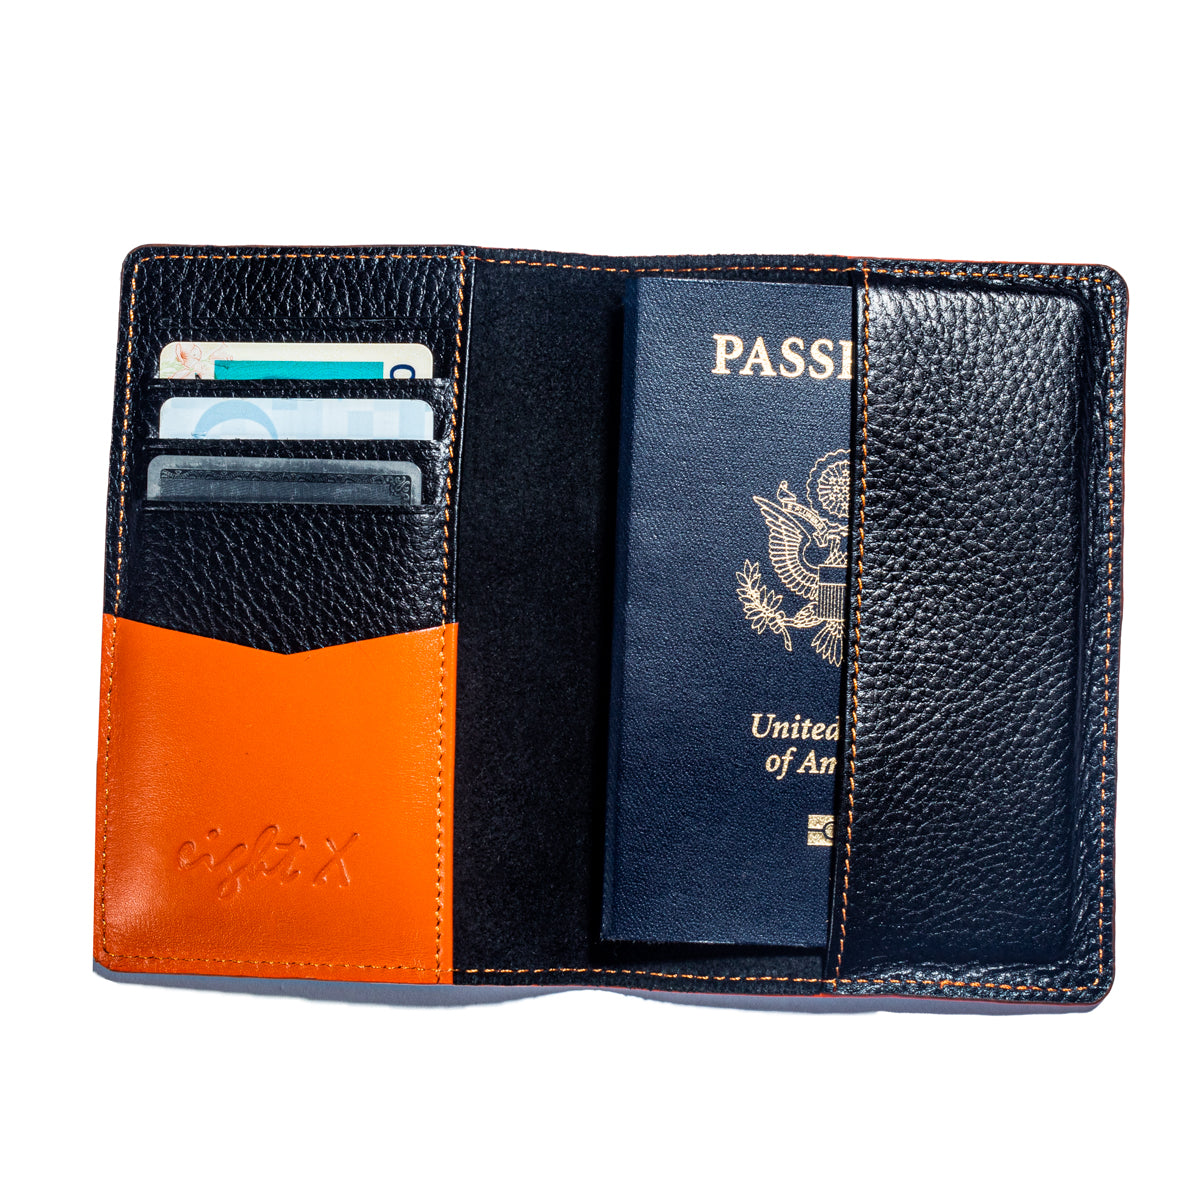 Leather slim travel wallet and passport cover